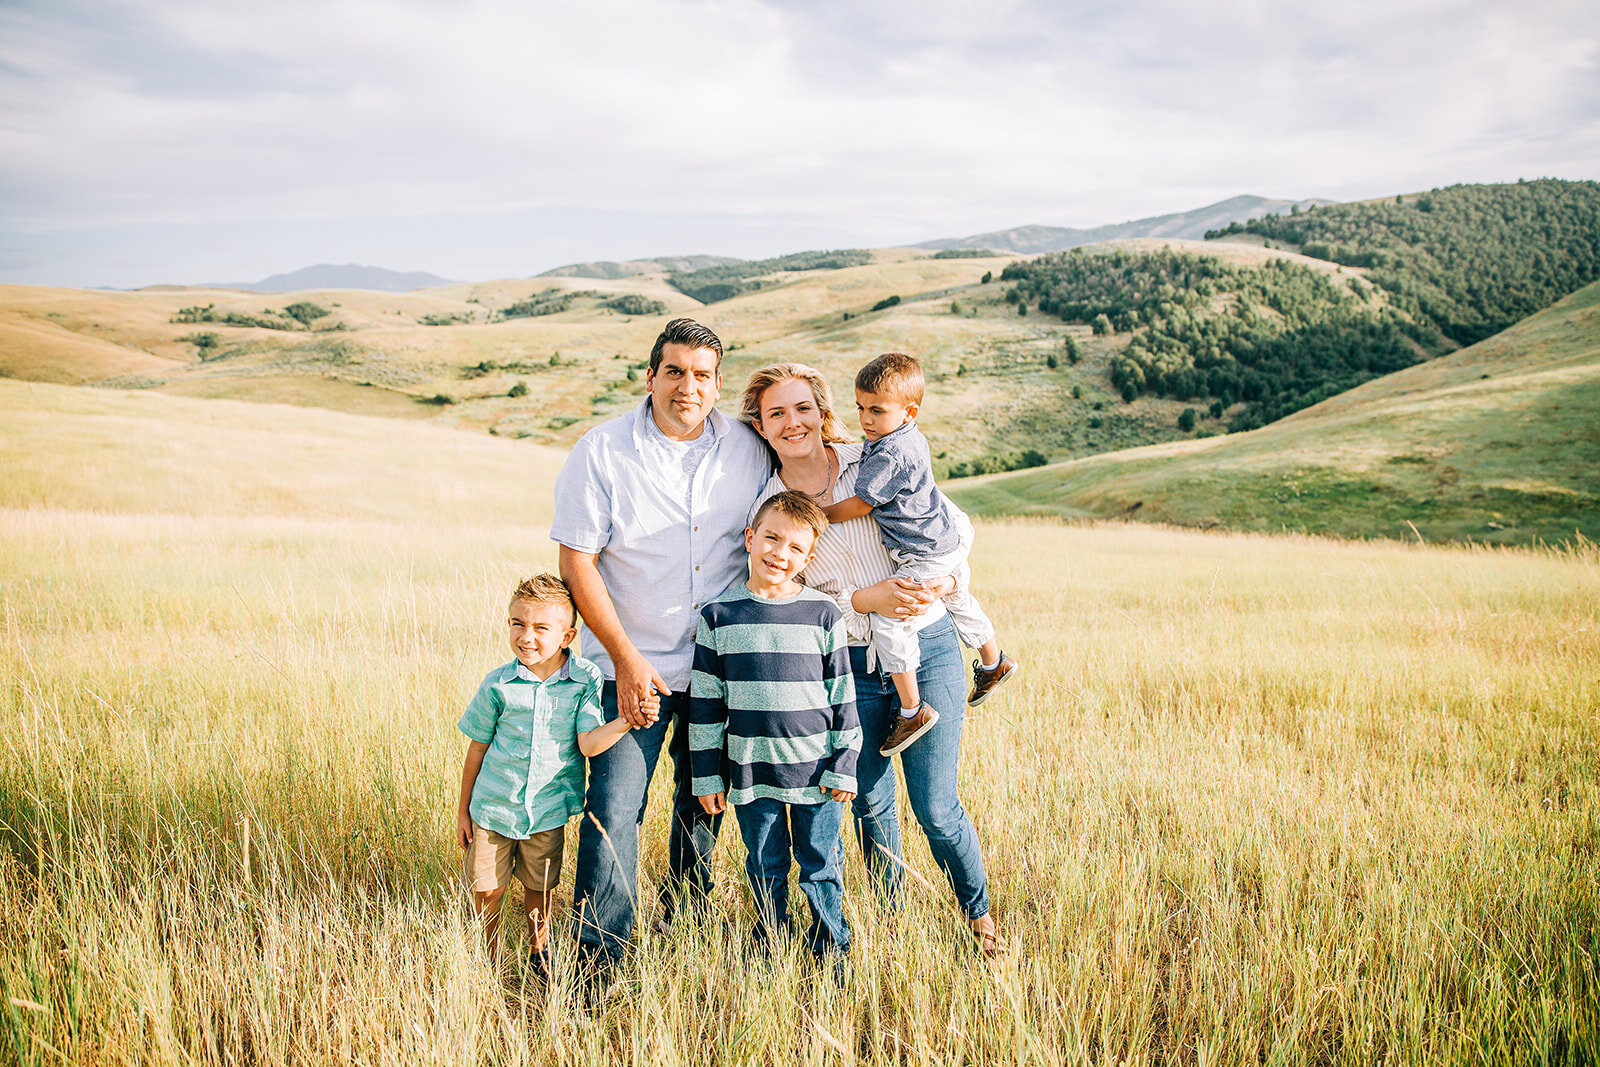  summertime shades of blue and mint color scheme for family pictures by bella alder photography professional family photographer in cache valley utah available for travel all over utah and beyond extended family pictures with a large family family of